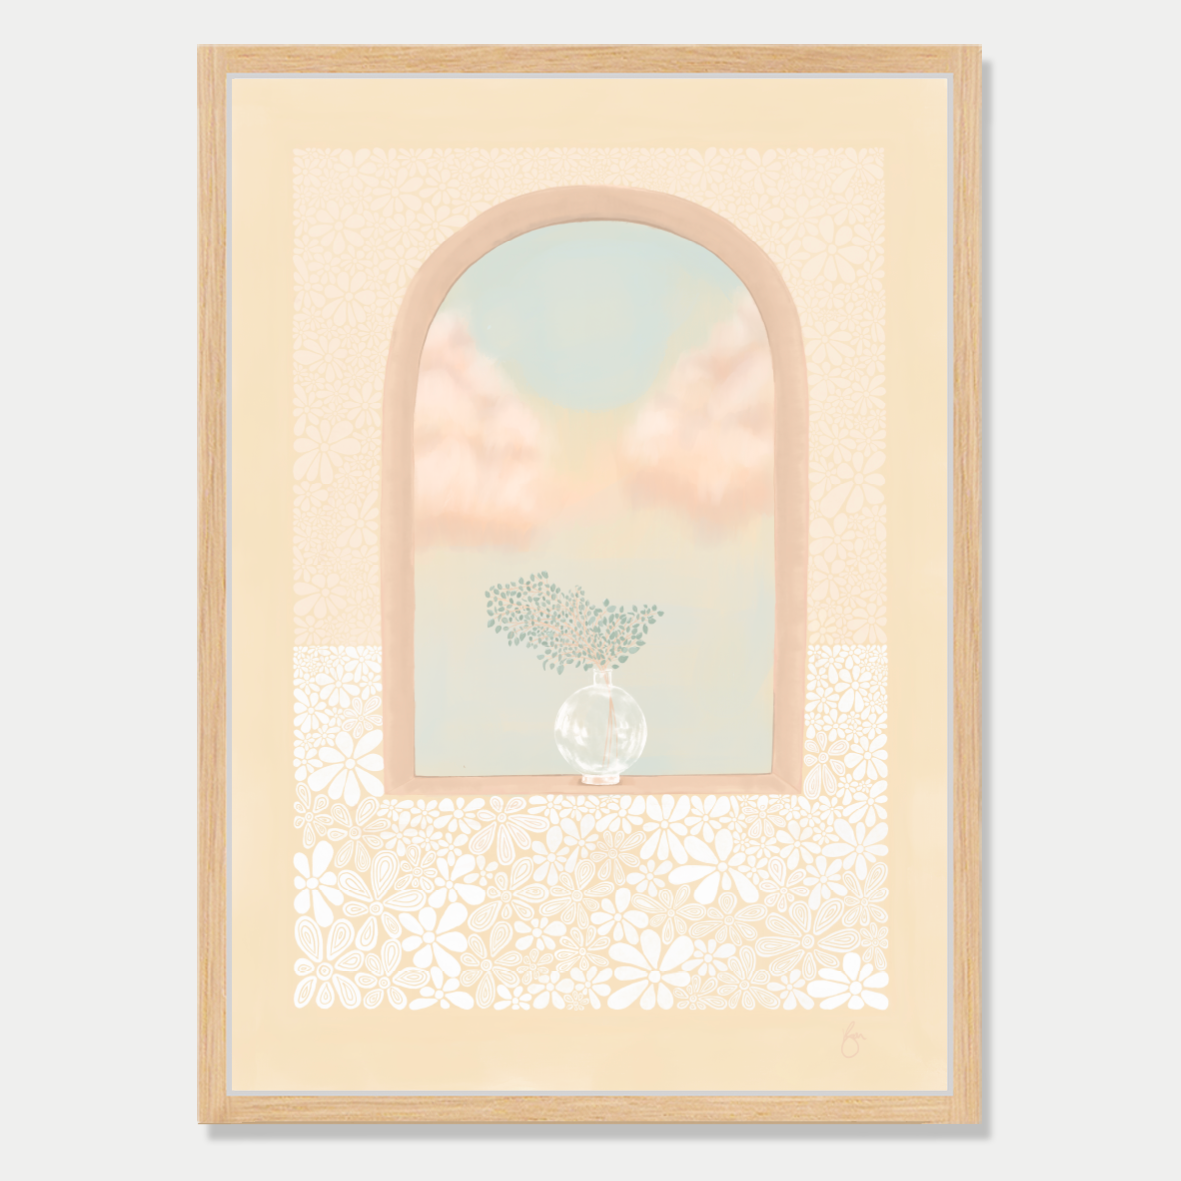 Art print of an arched window with a plant sitting in it and a view of fluffy clouds, in a pastel yellow and peach colour palette, by Bon Jung. Printed in New Zealand by endemicworld and framed in raw oak.